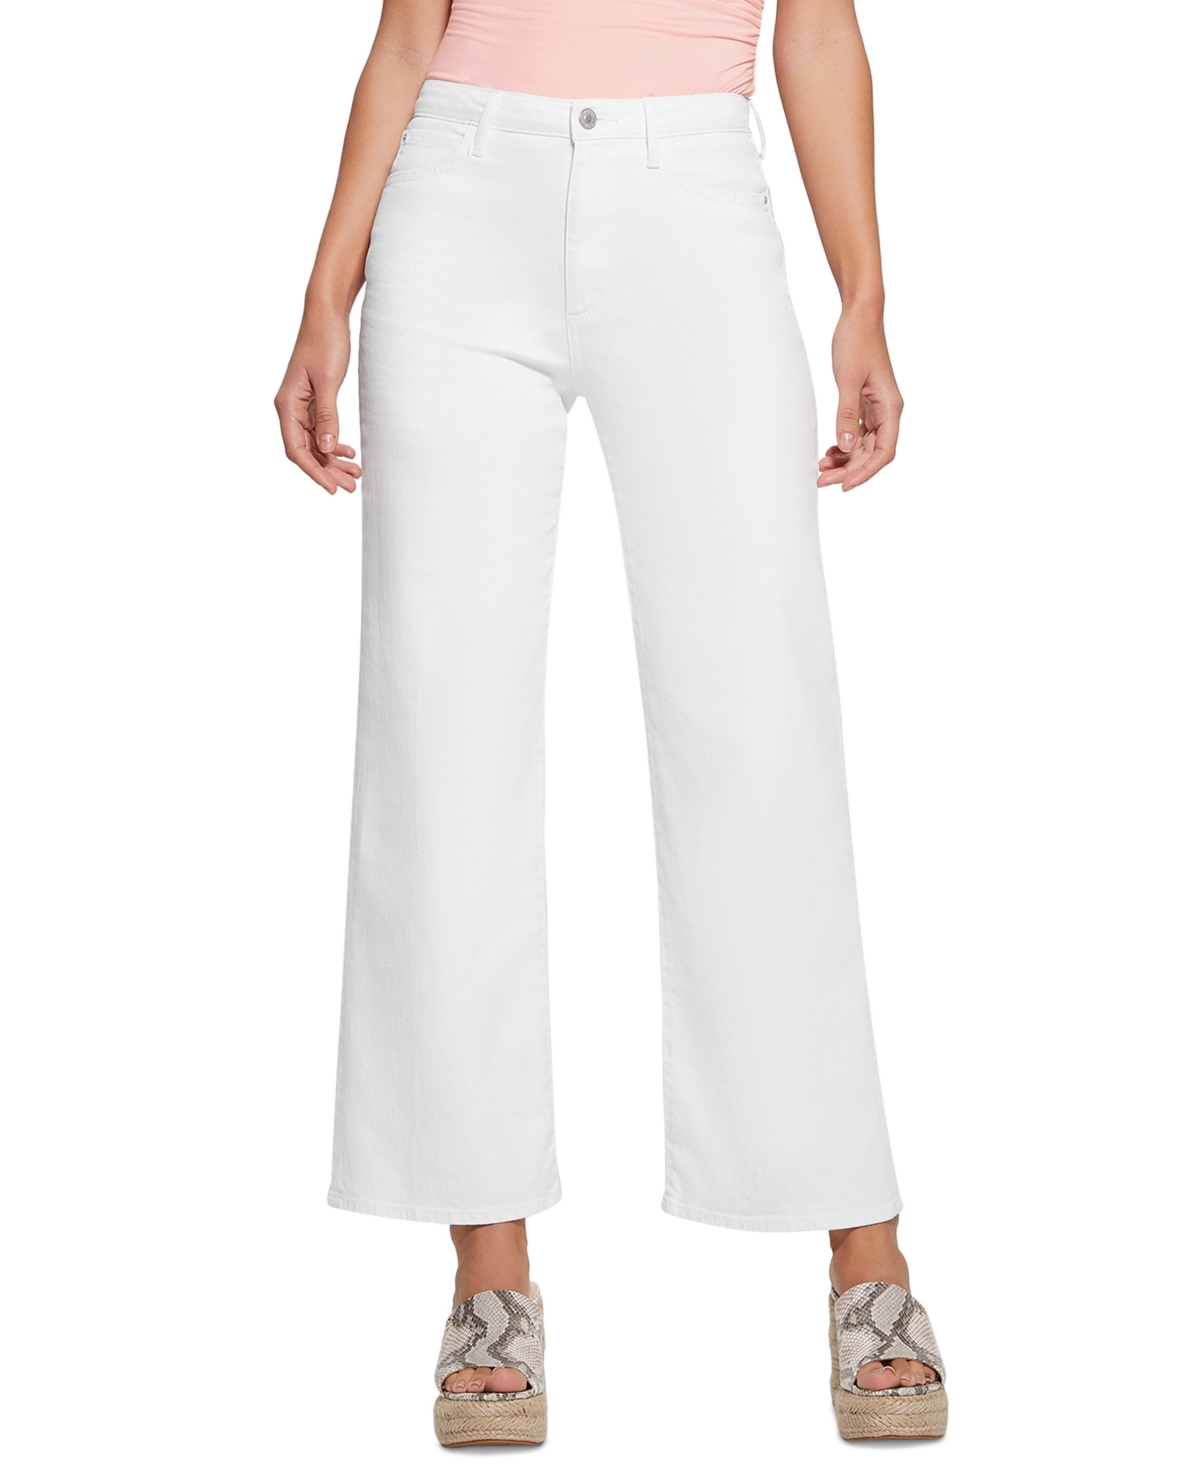 Women's Wide-Leg Ankle Jeans - Pure White